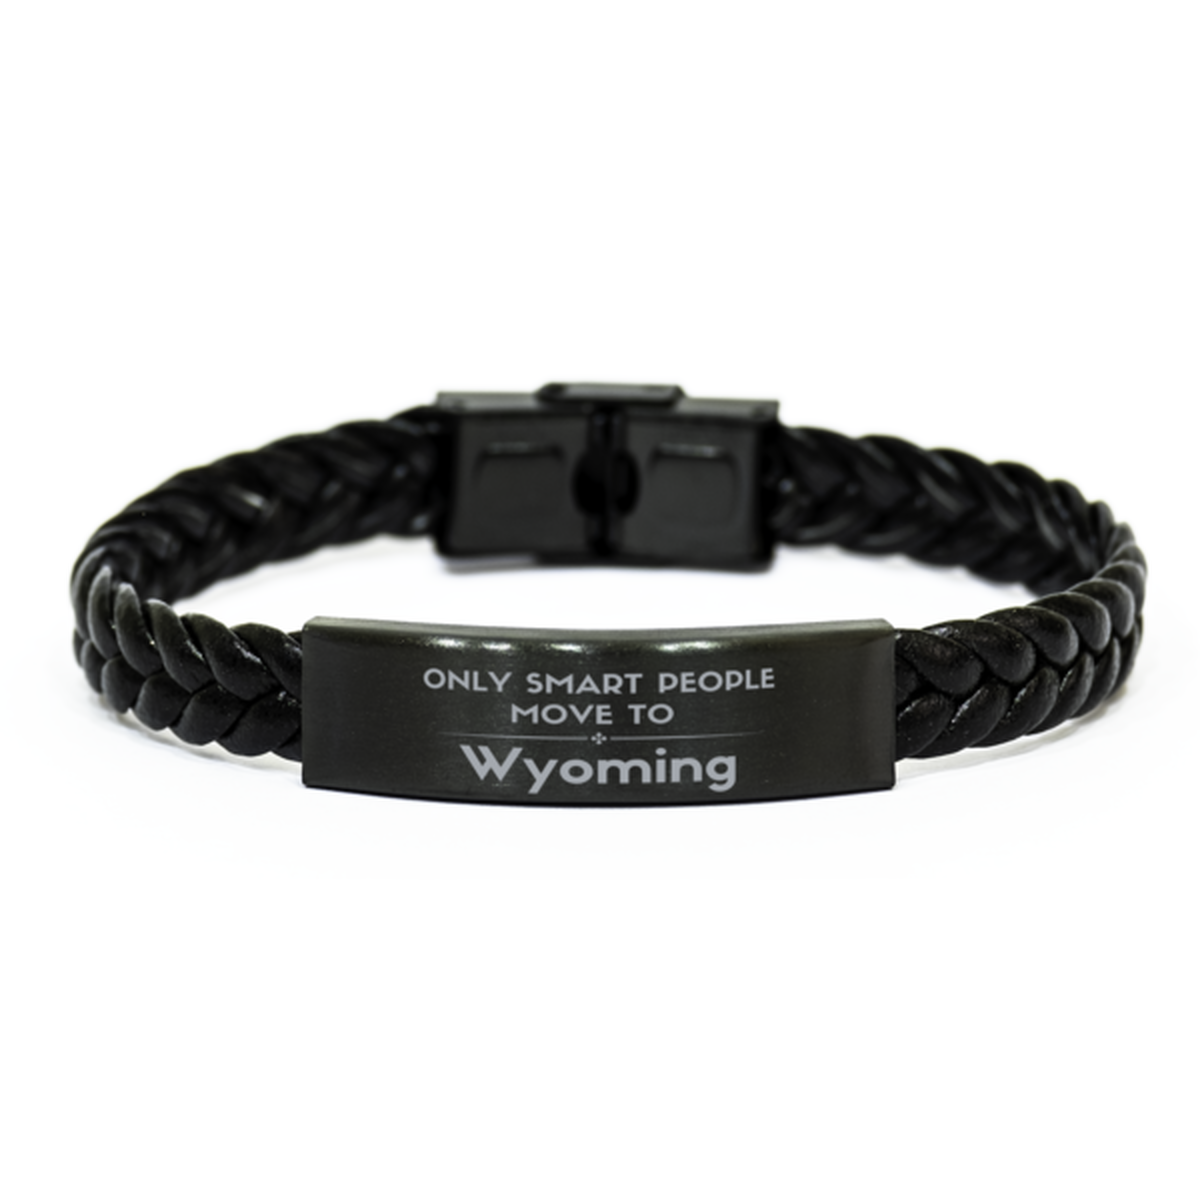 Only smart people move to Wyoming Braided Leather Bracelet, Gag Gifts For Wyoming, Move to Wyoming Gifts for Friends Coworker Funny Saying Quote